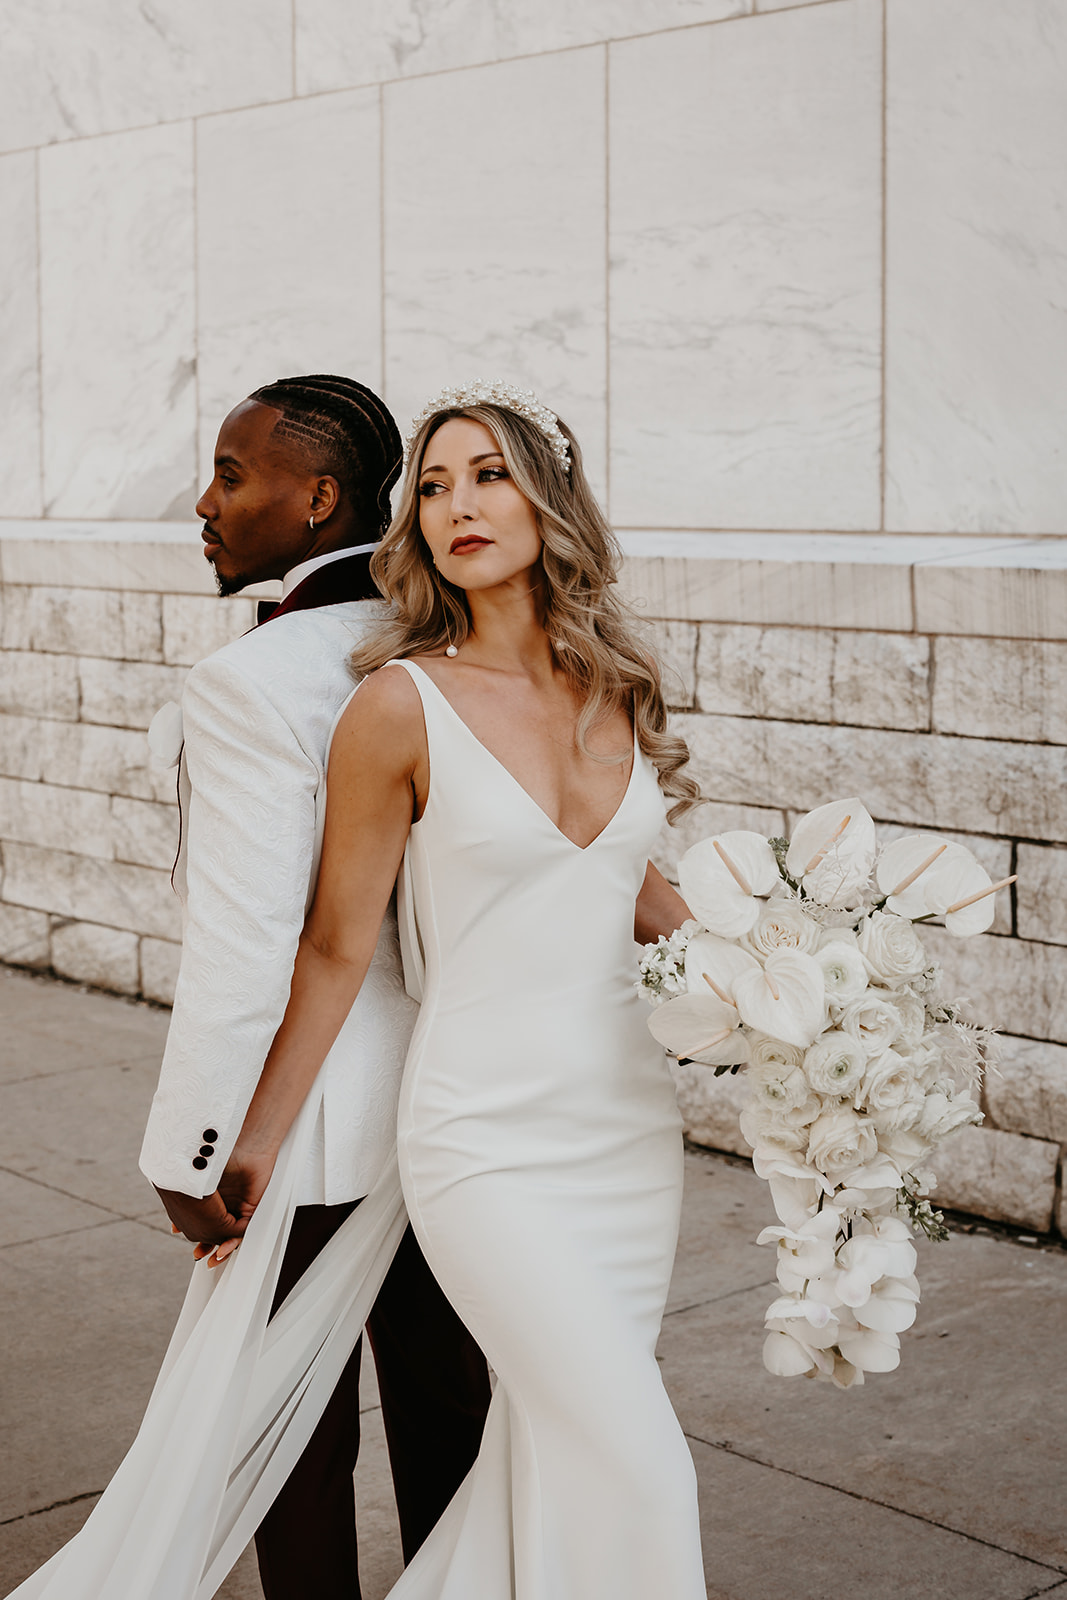 Trendy and sophisticated wedding portrait in downtown Cleveland - showcasing the couple's unique personality.